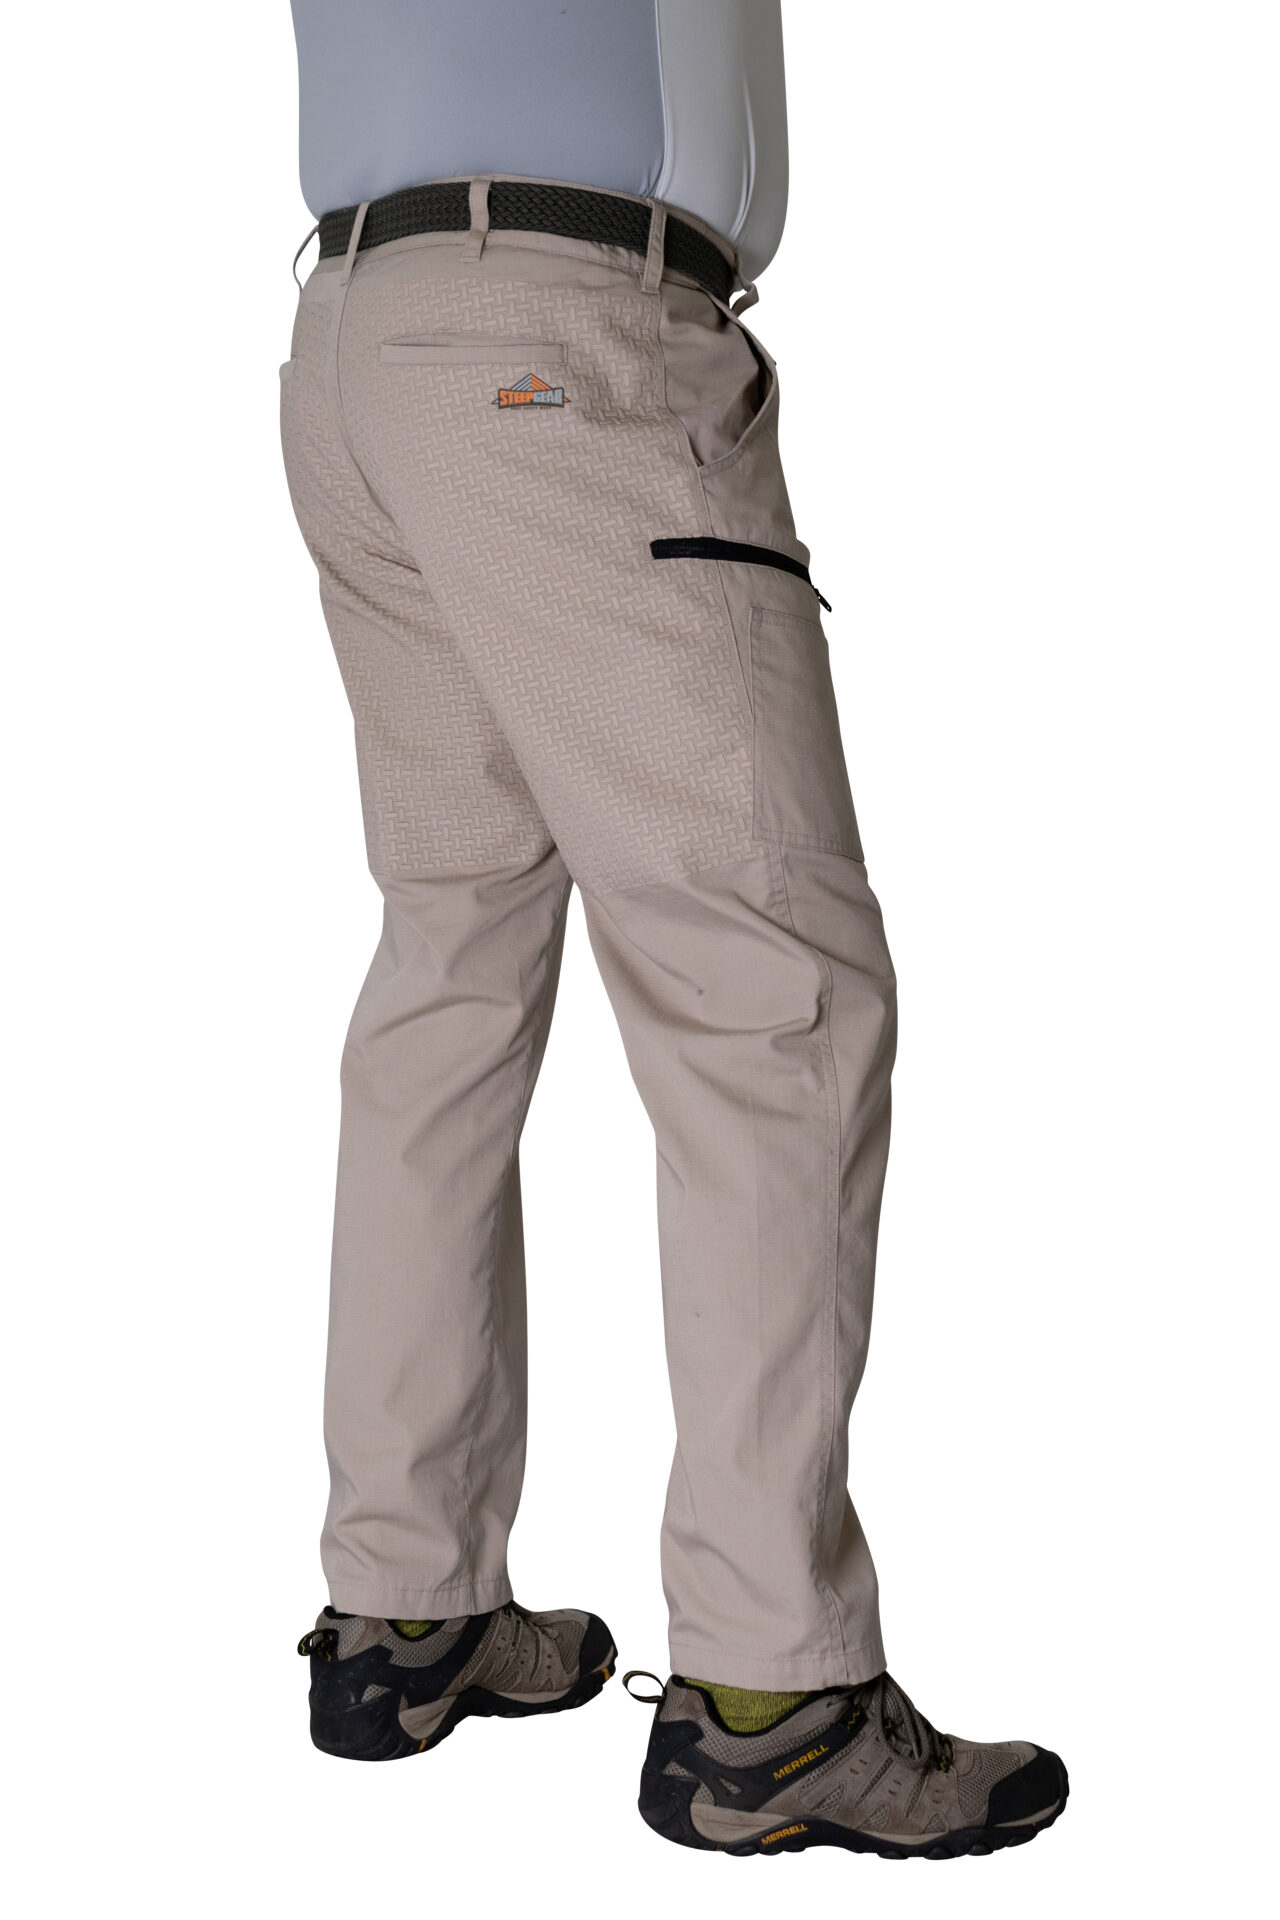 Safety Shorts by Steep Gear